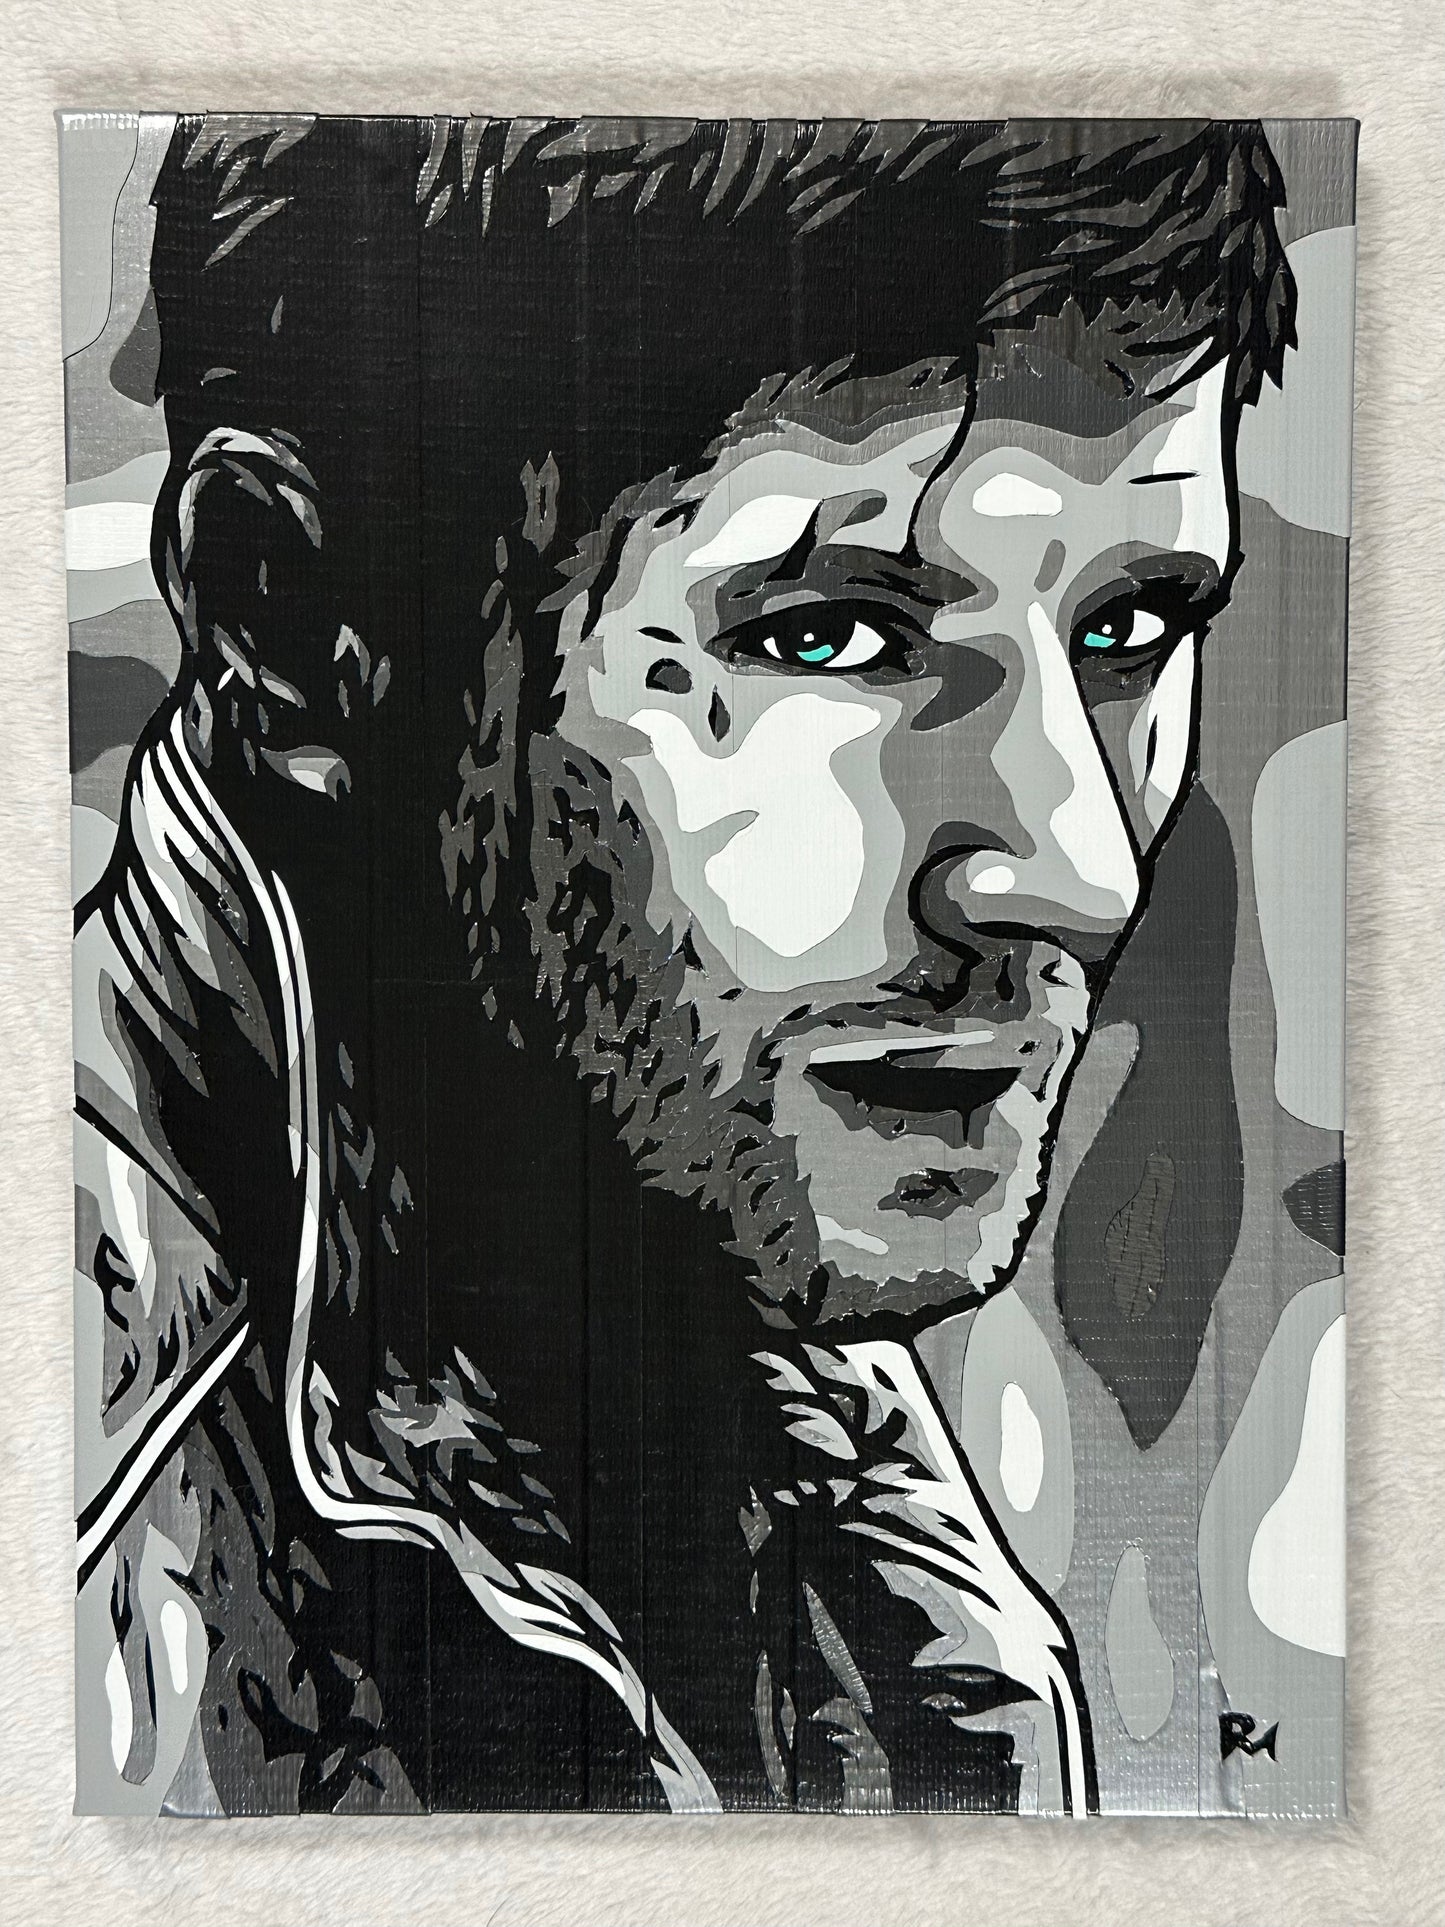 A black and white image of Dean Winchester, created with multiple shades of duct tape, on a white background